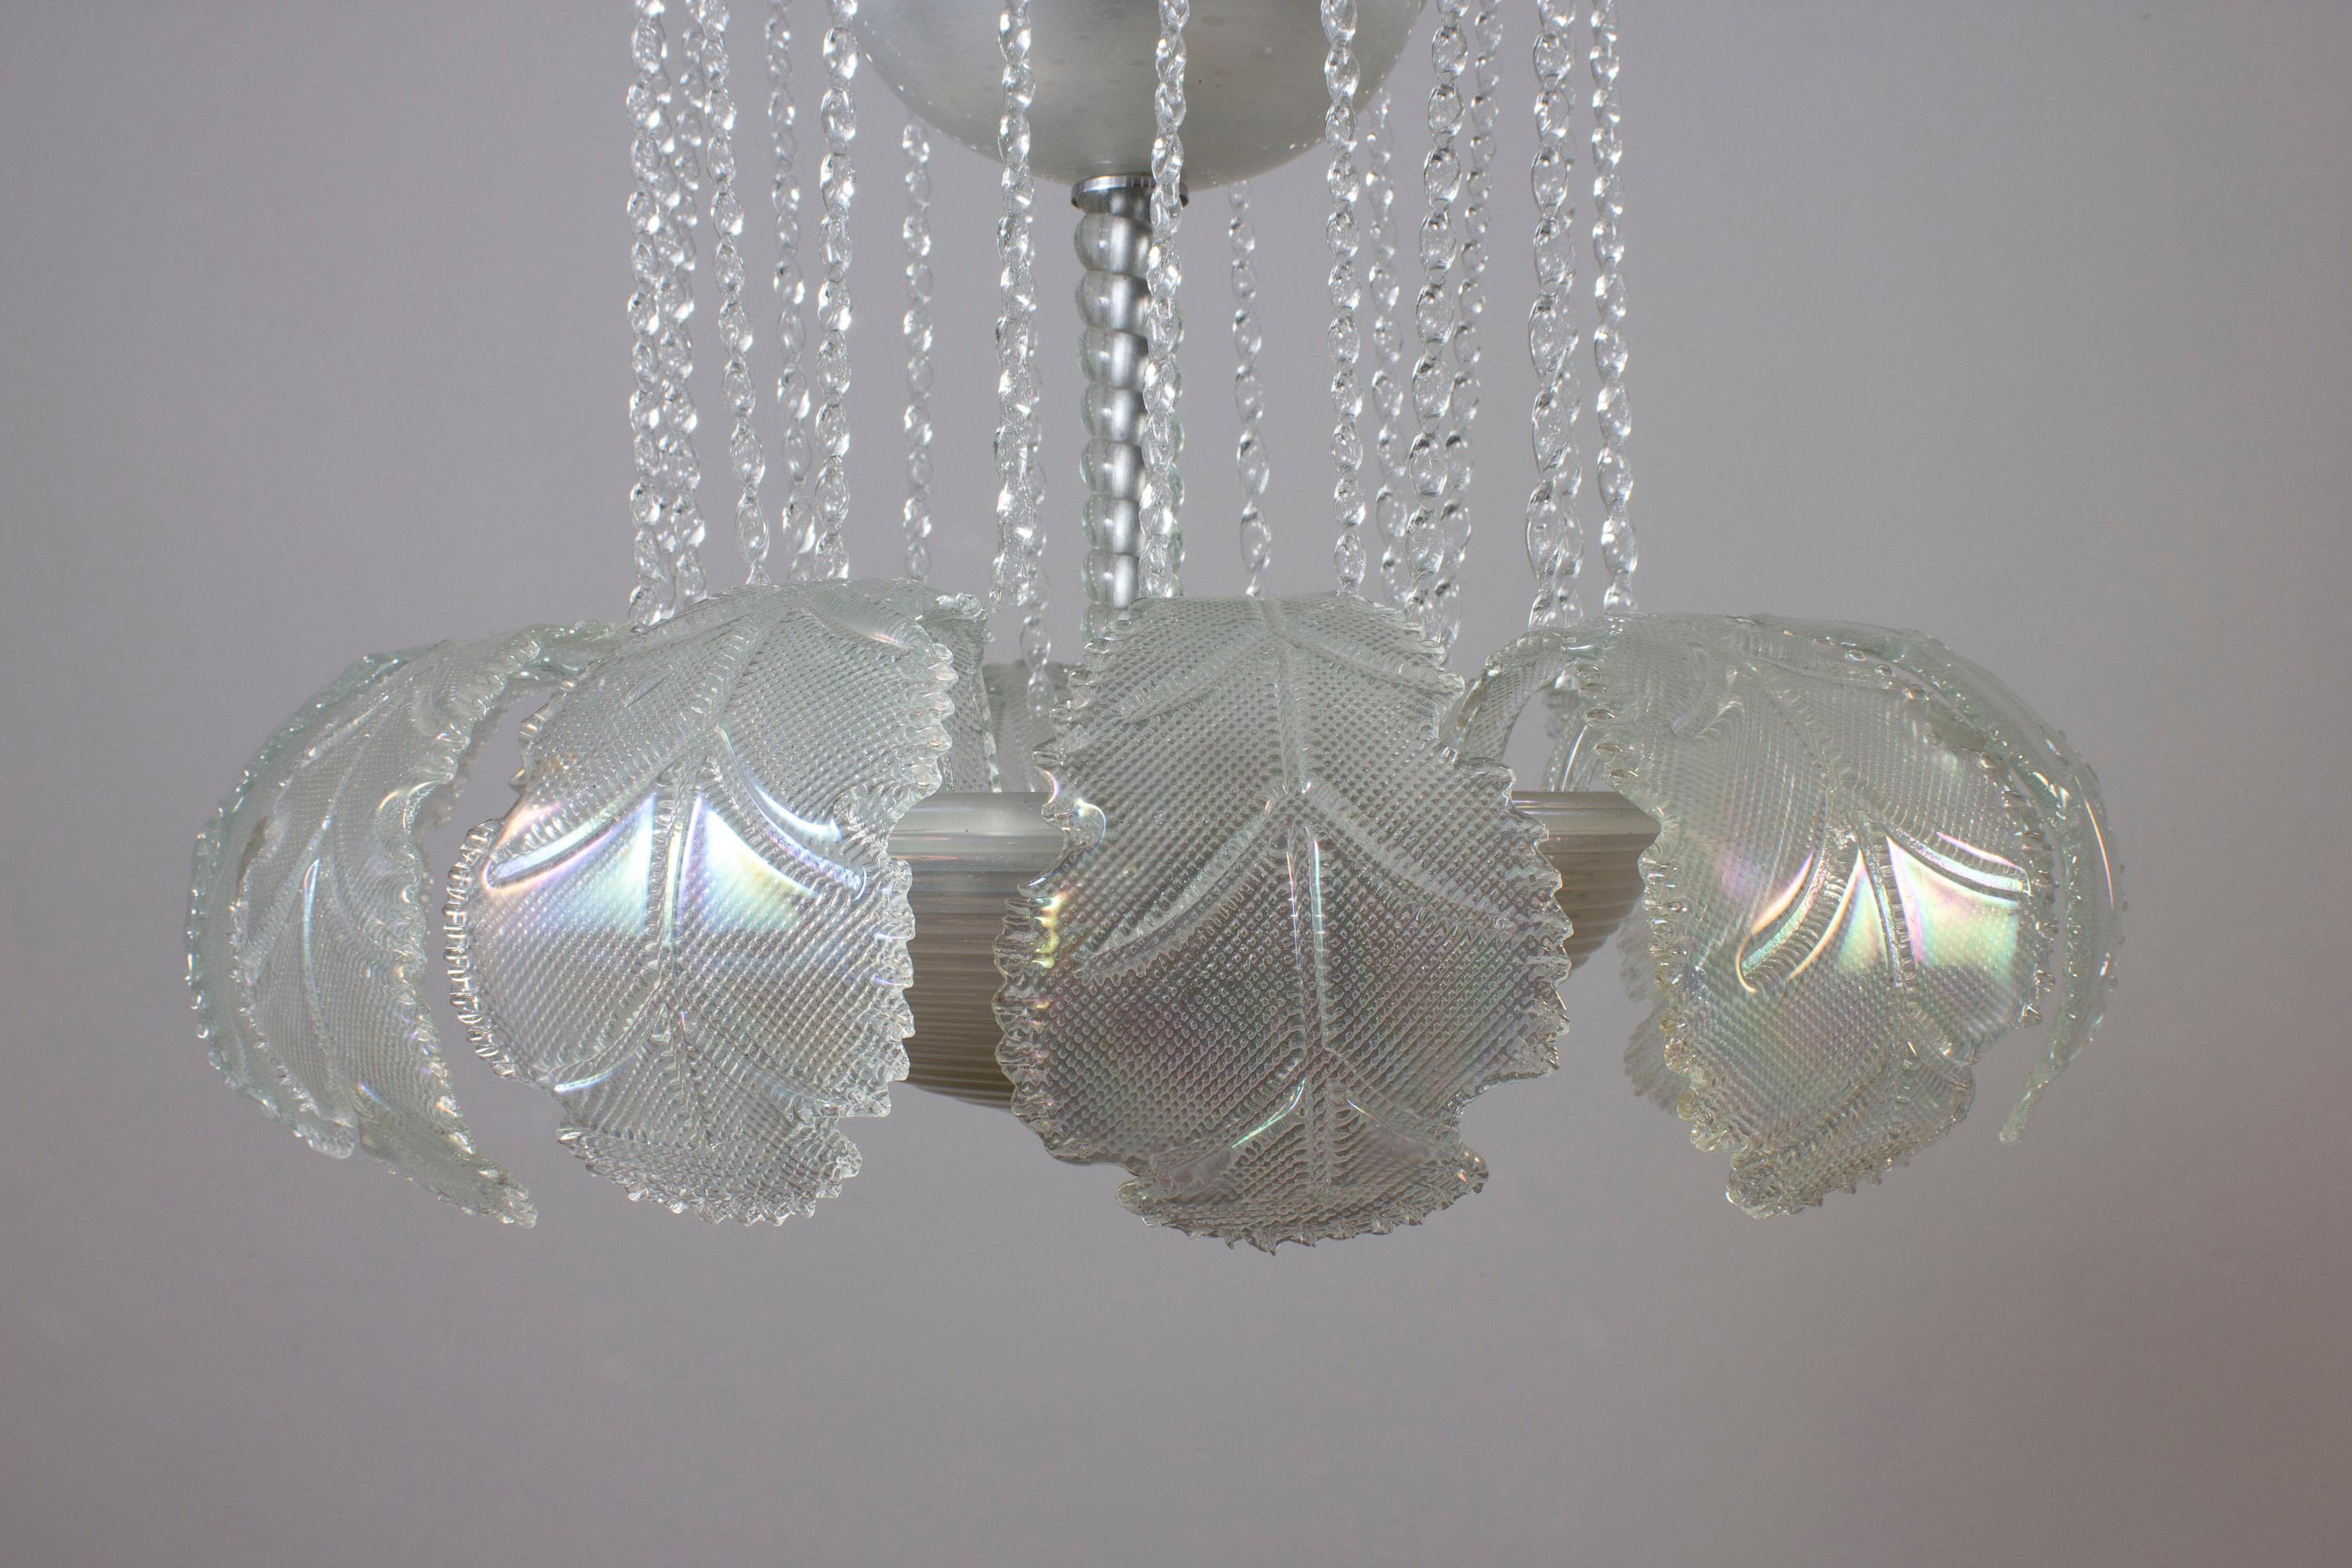 Superb Art Deco Ninfea Murano Glass Chandelier by Barovier Italy, 1940 For Sale 6